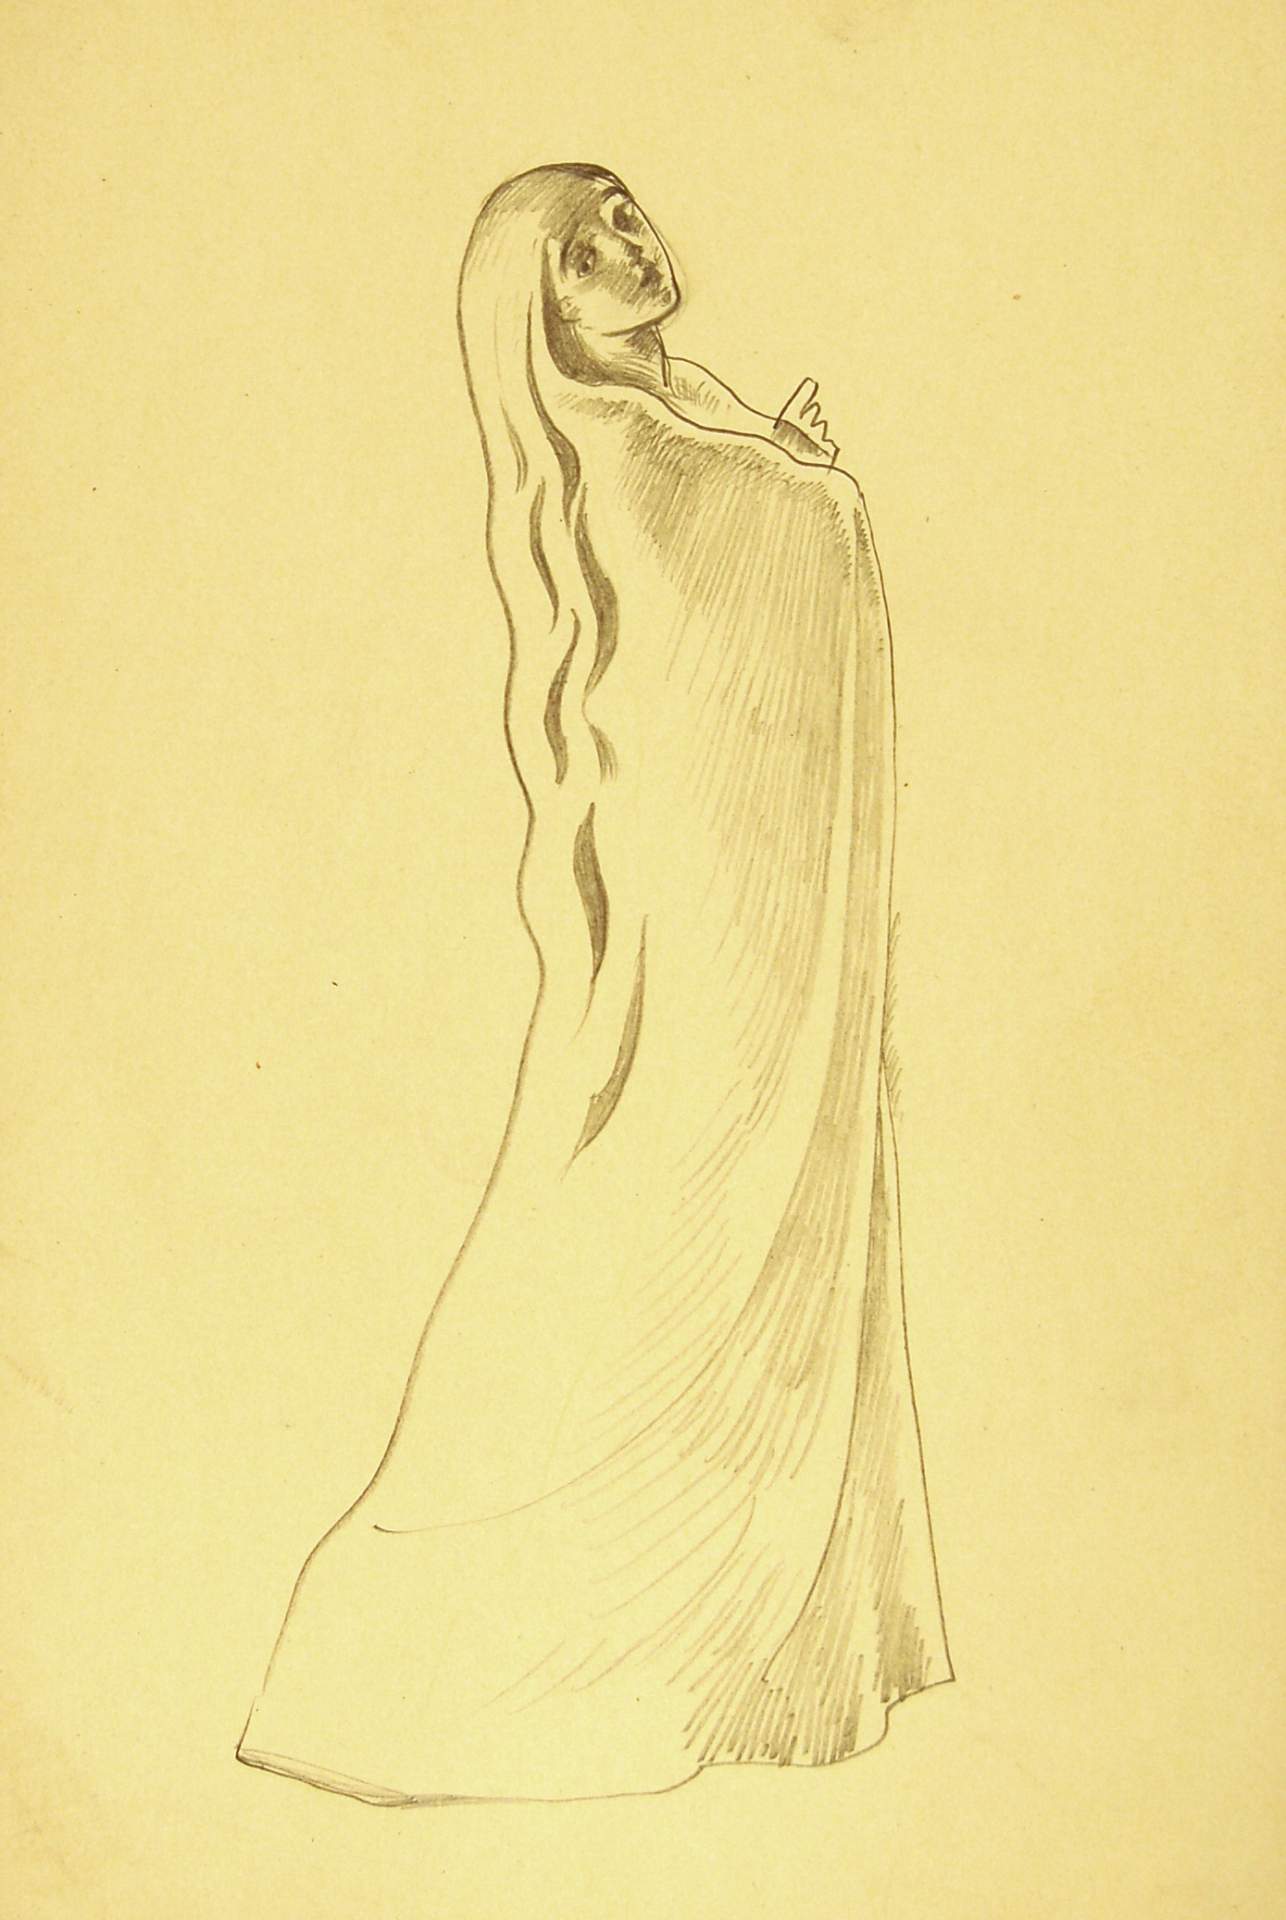 Female Figure in Long Robe with Long Hair